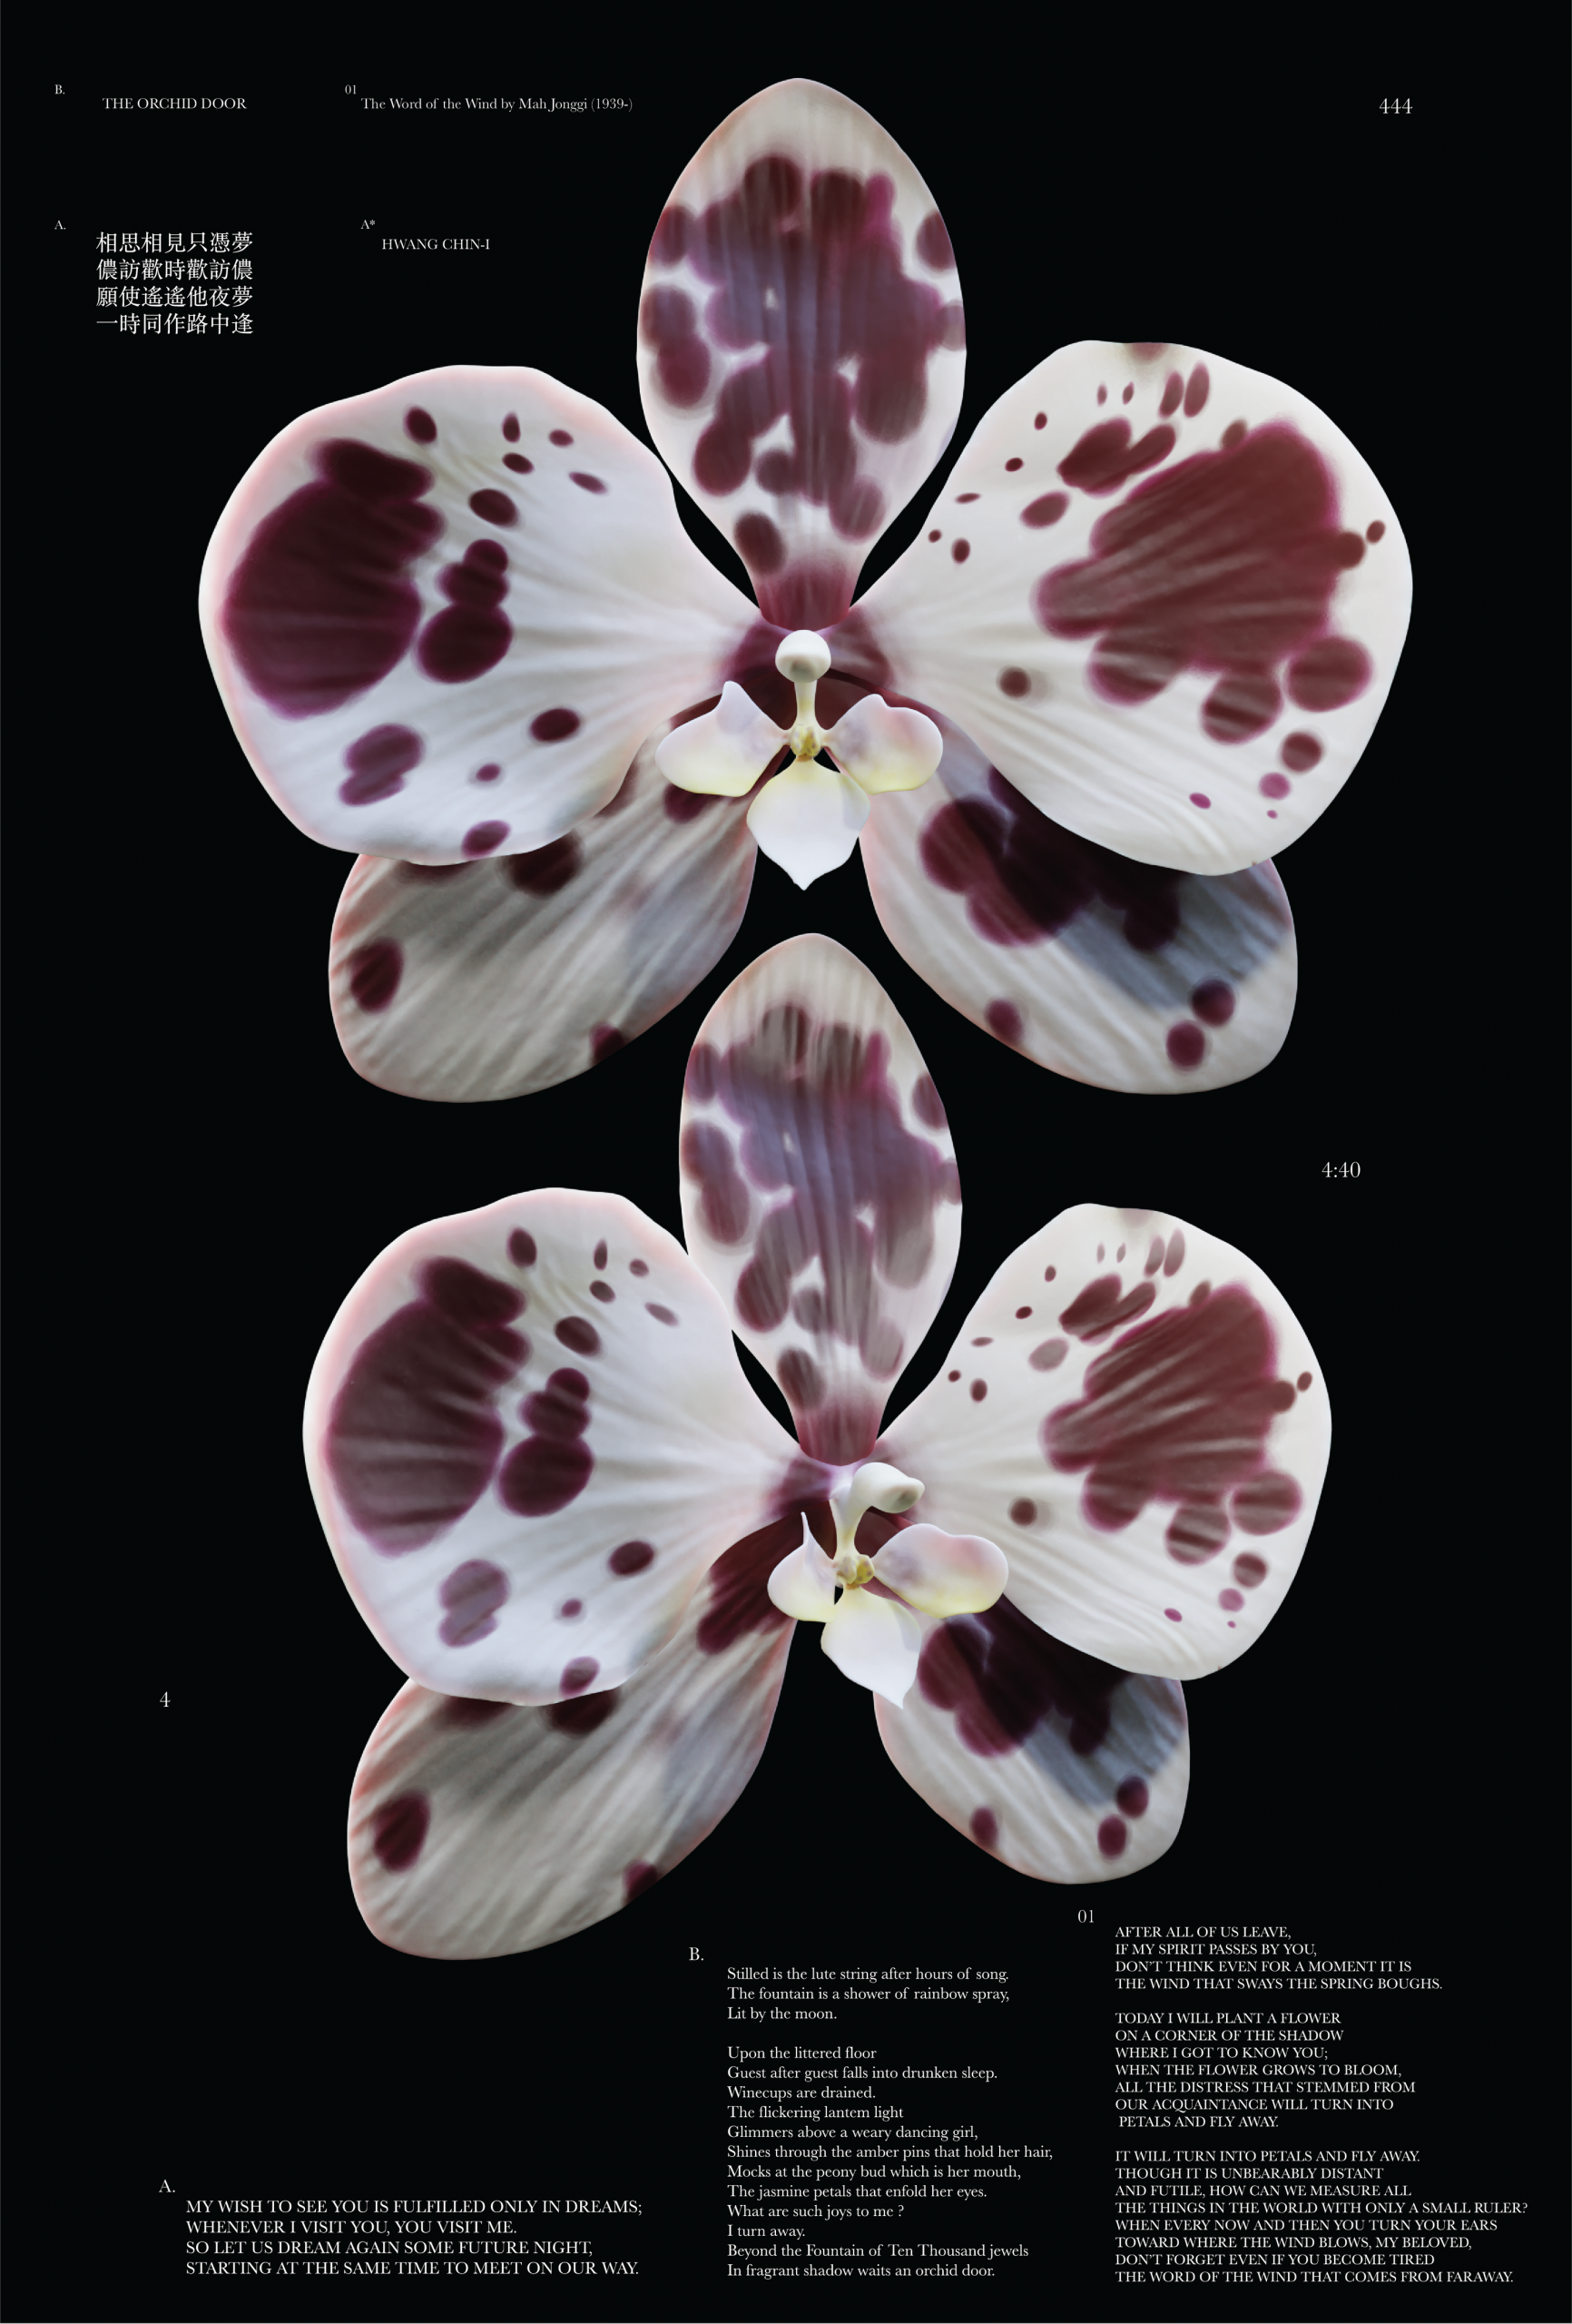 Image of poster with two 3-d generated images of spotted orchids on a black background